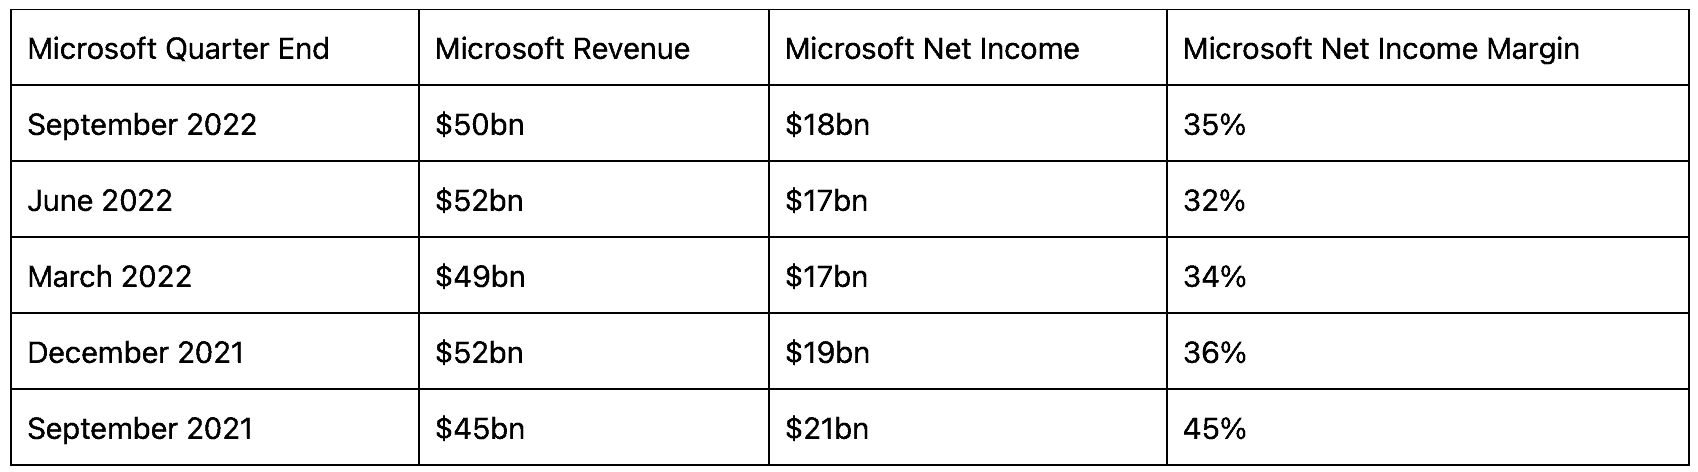 A table showing Microsoft's quarterly revenue, net income and net income margin from September 2021 to September 2022. Revenues have been fairly flat and net income margin appears to be trending lower over the period.